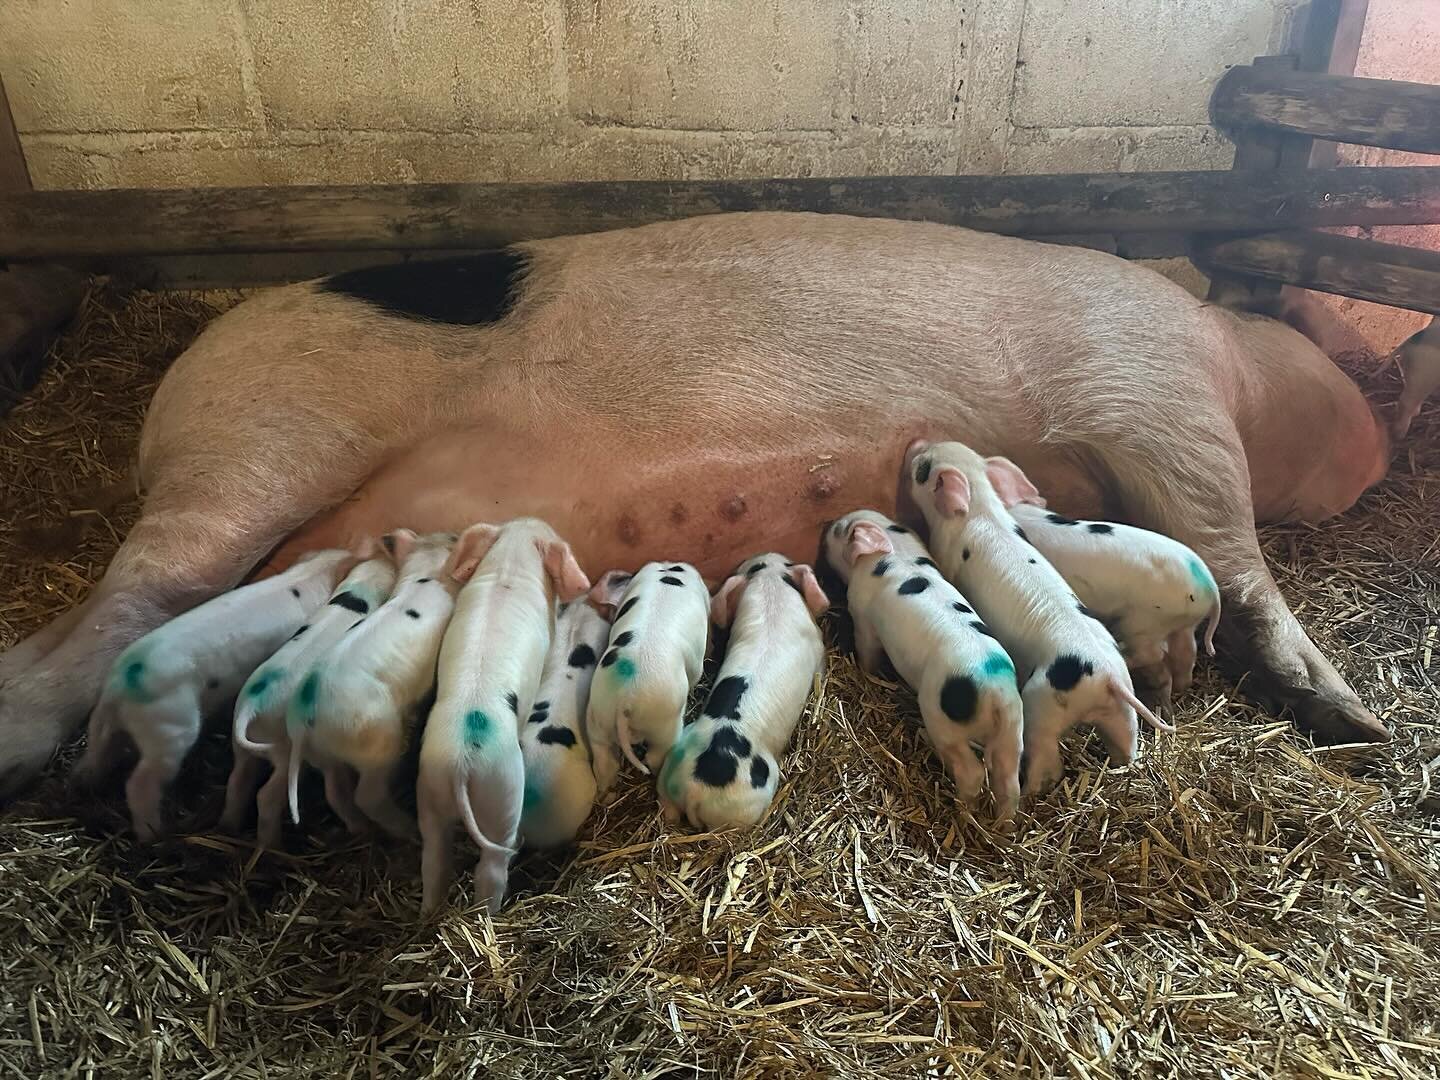 We love having the opportunity to see these little piggies here at Penstone Farm 🐷 🐽 🐖